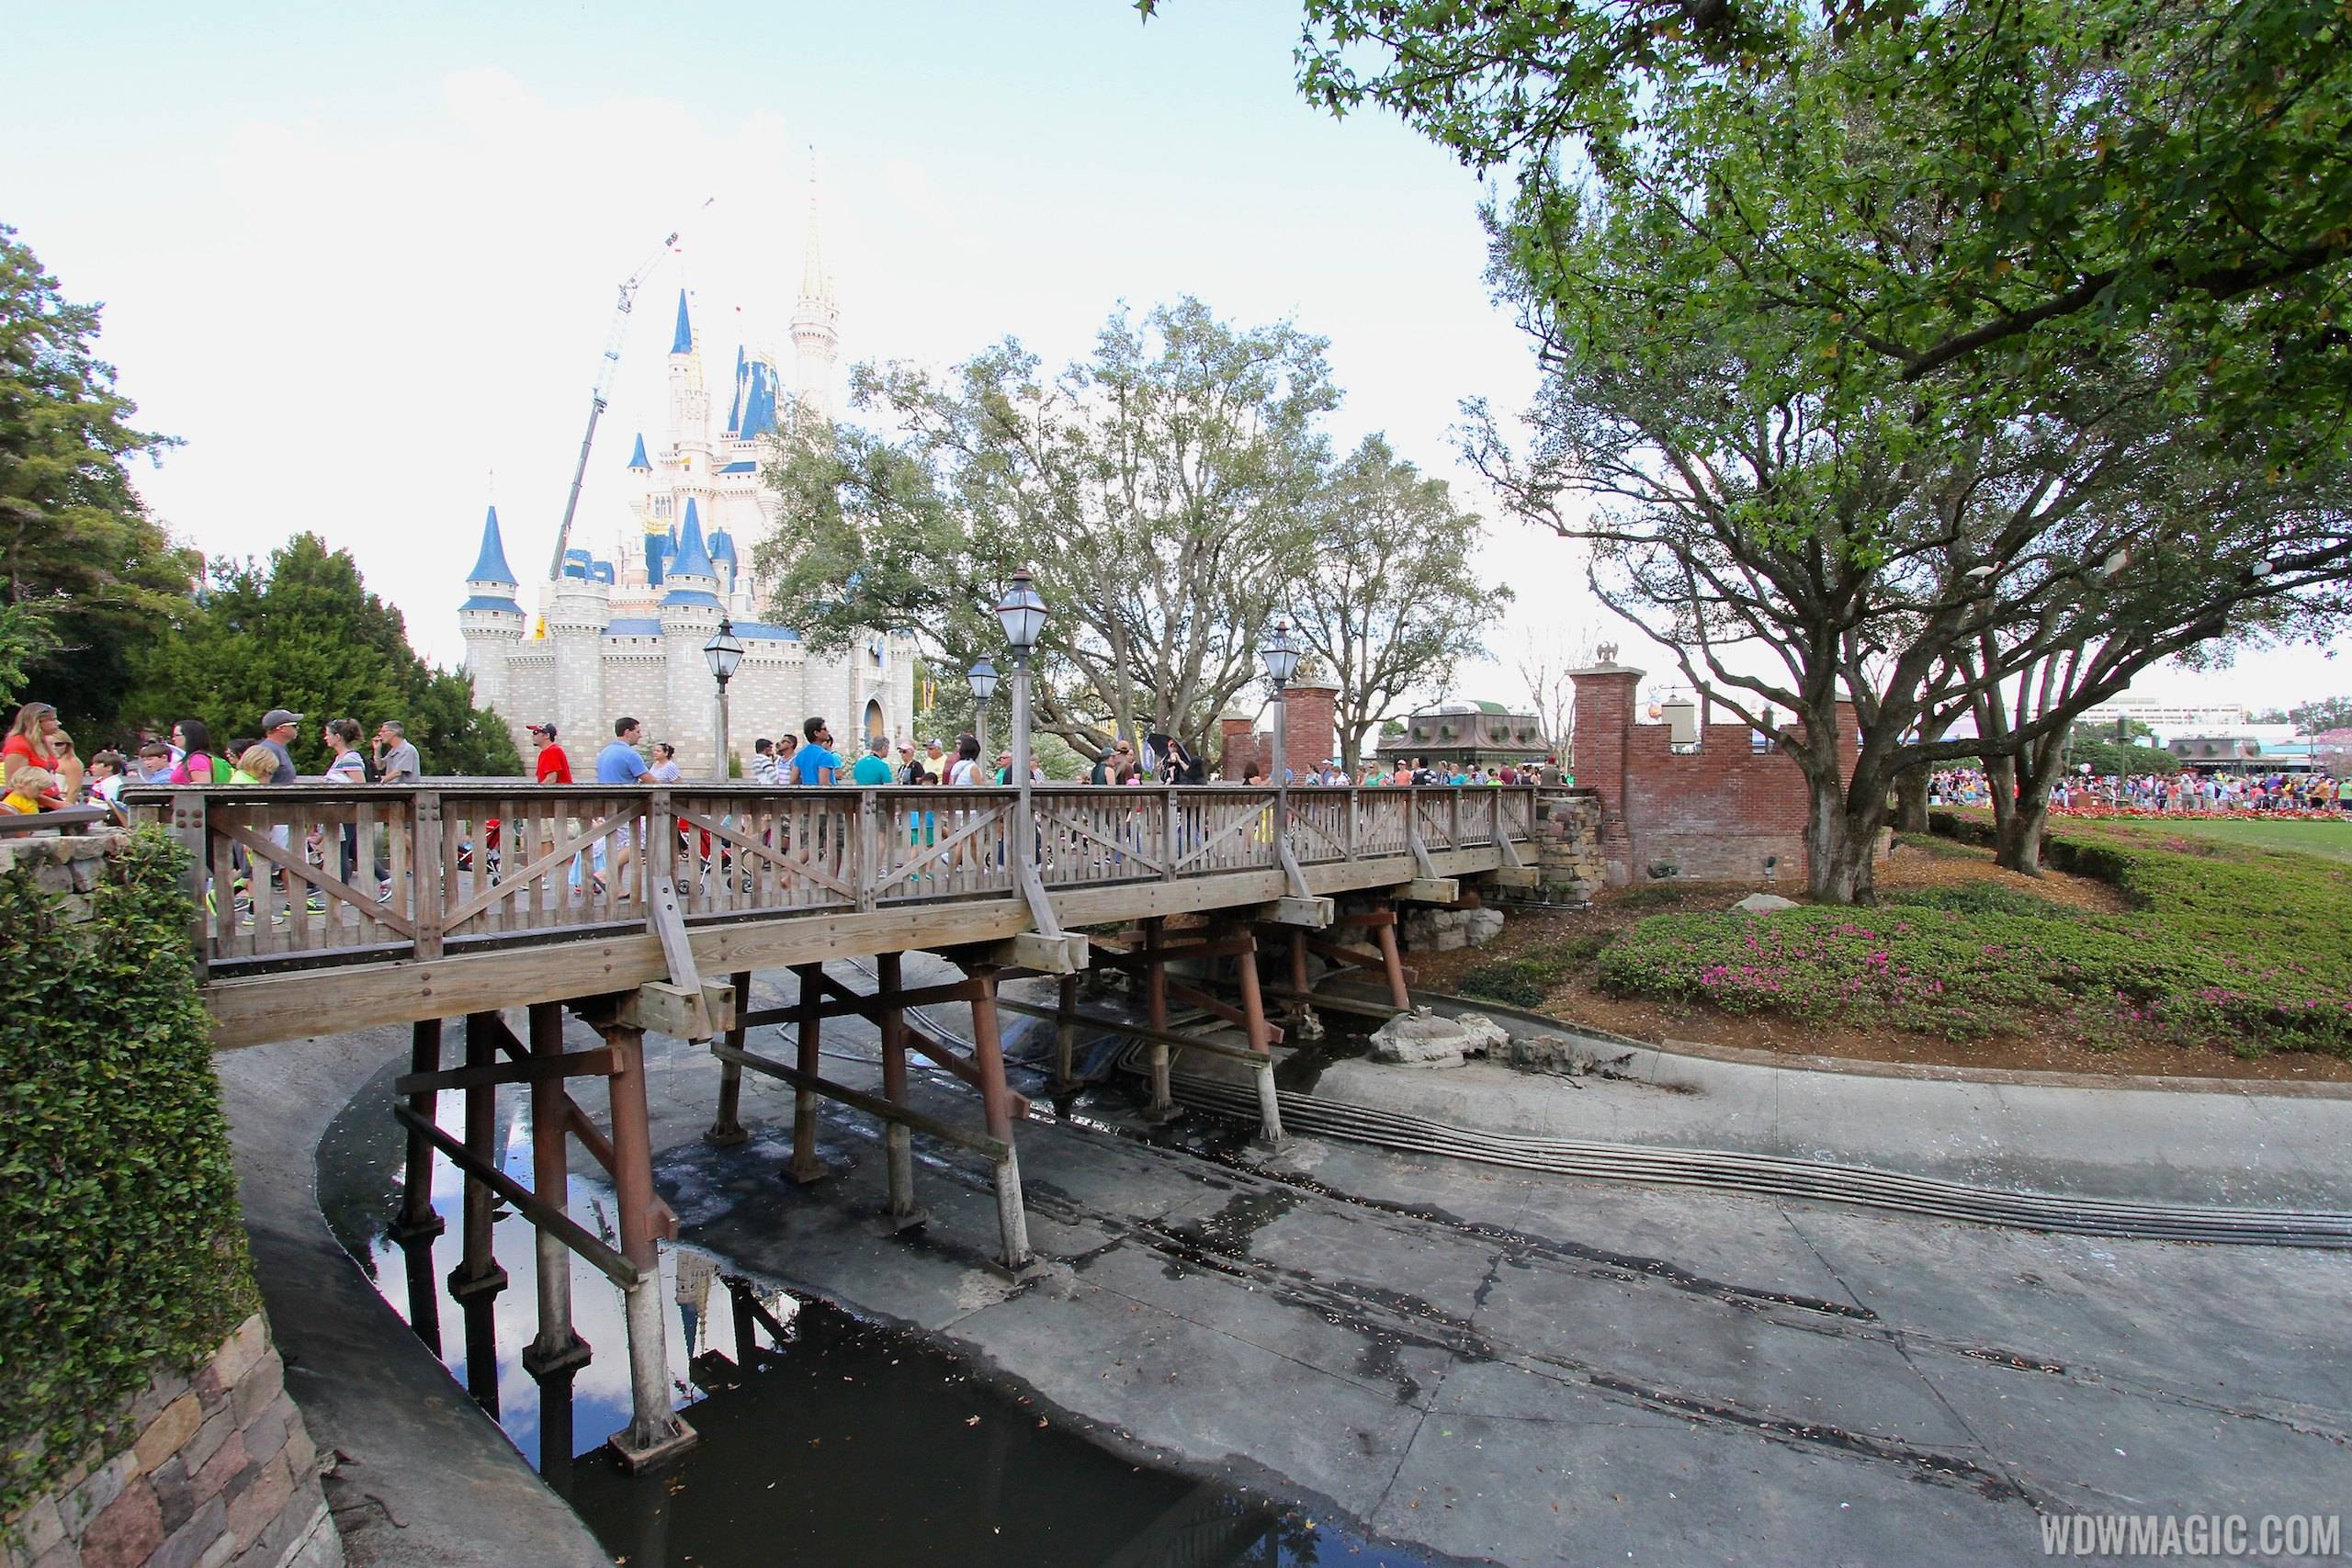 PHOTOS - A look at the moat draining project at the Magic Kingdom